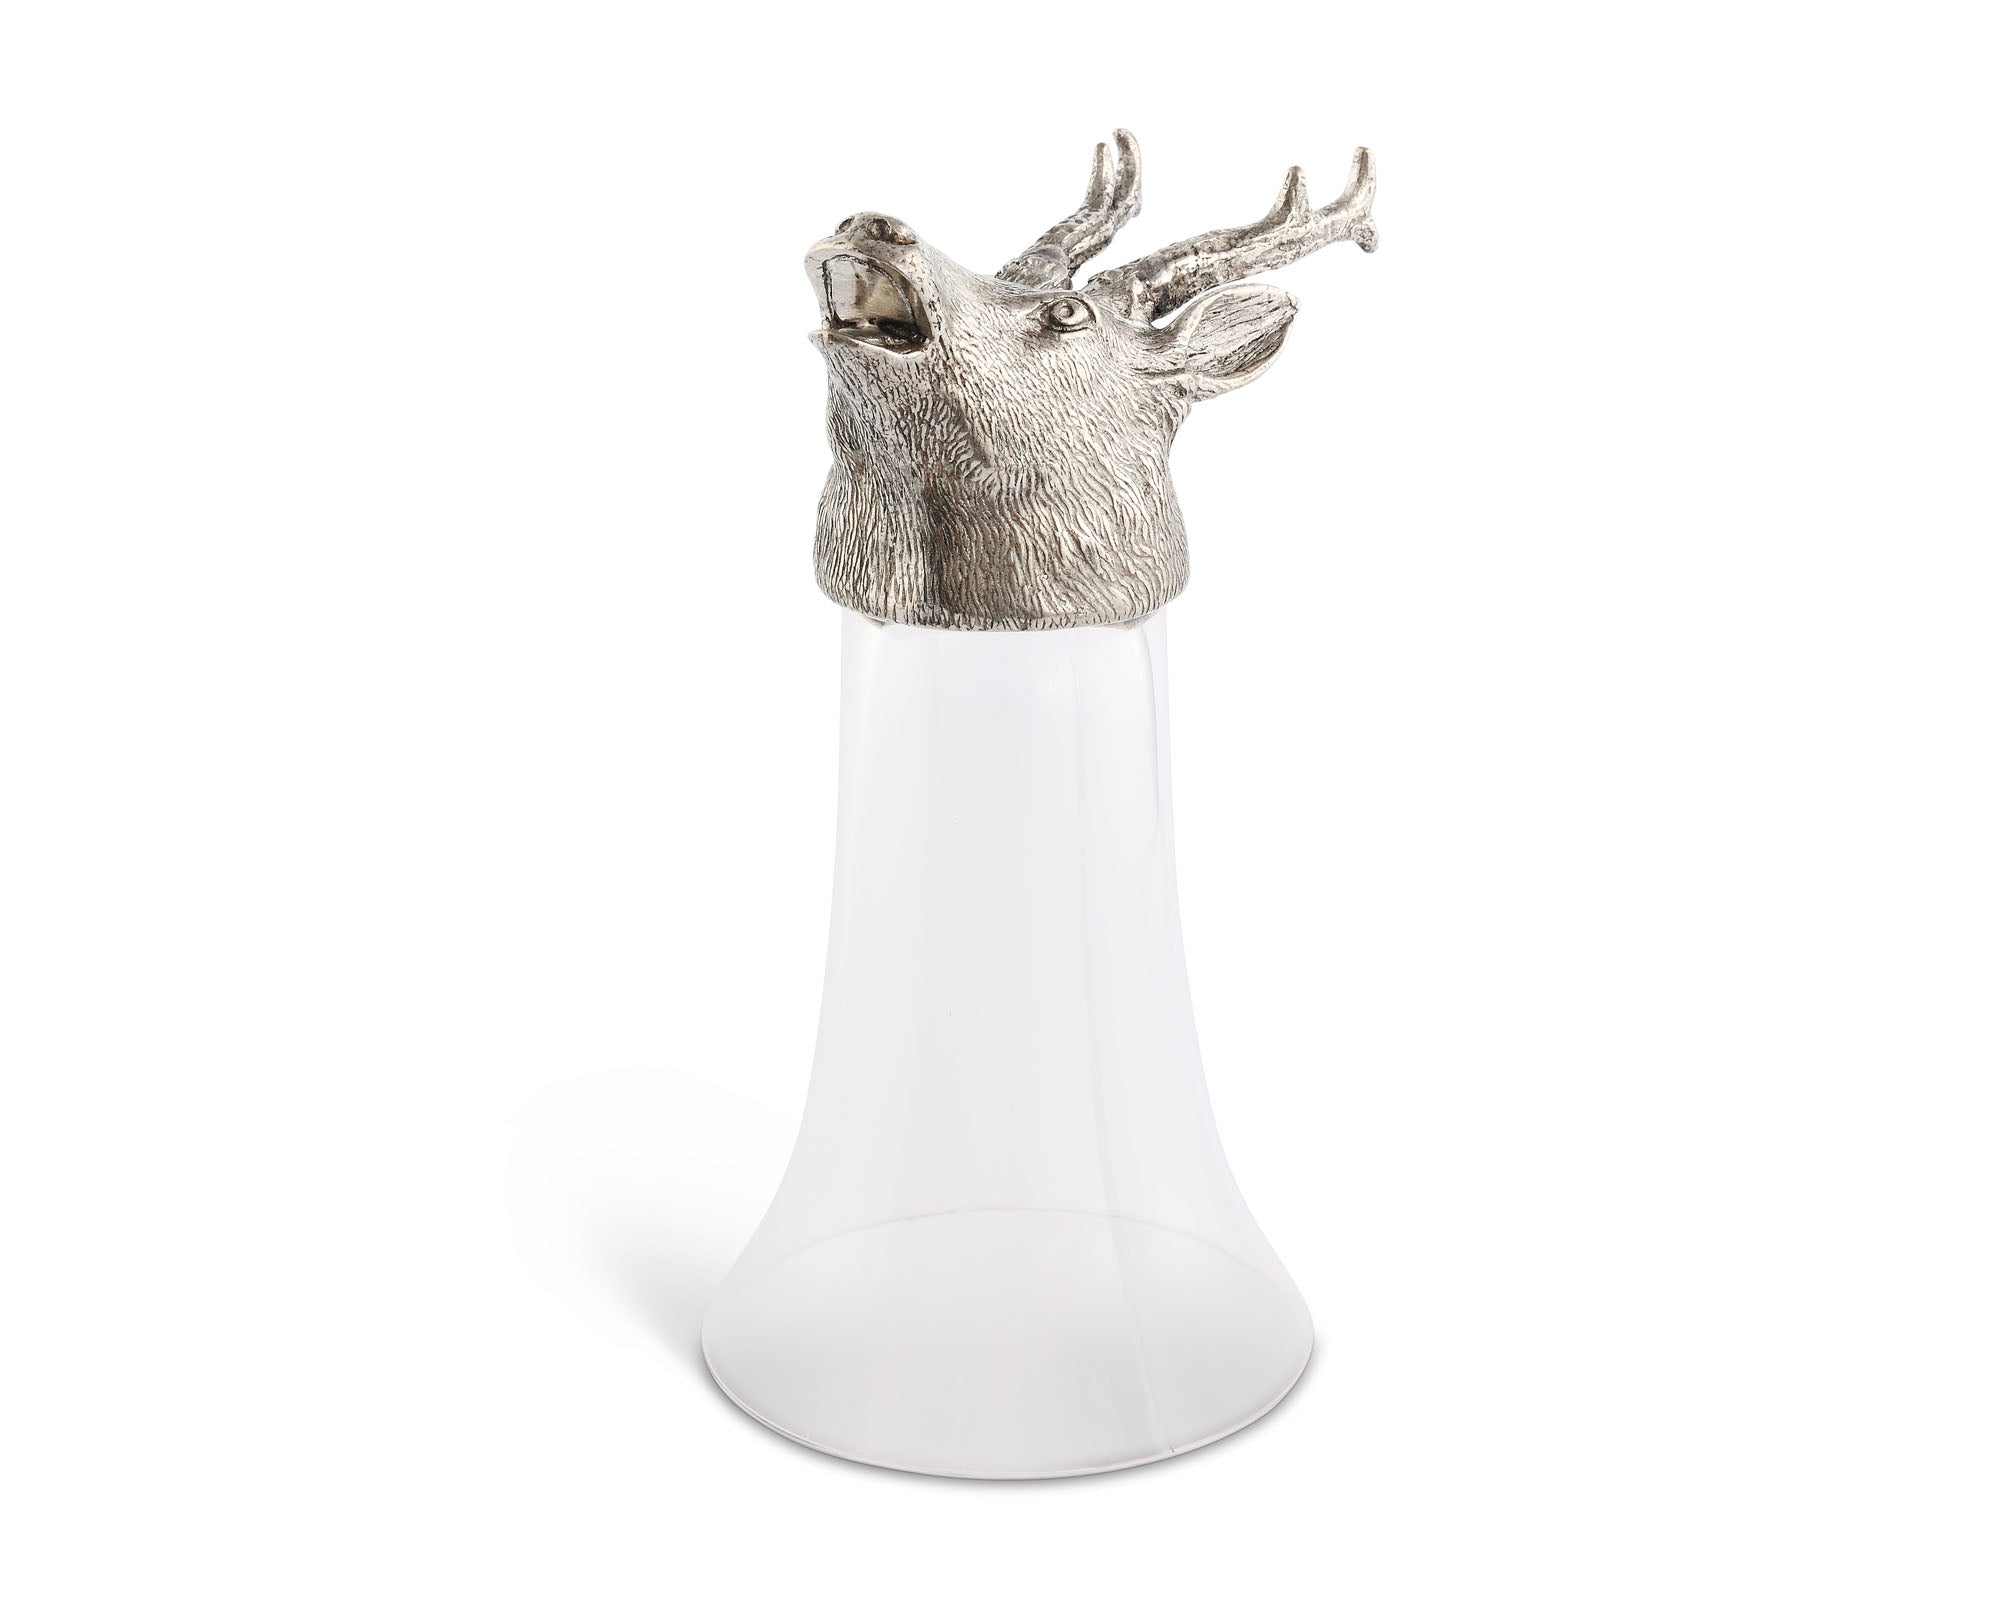 Vagabond House Stag Stirrup Cup Product Image